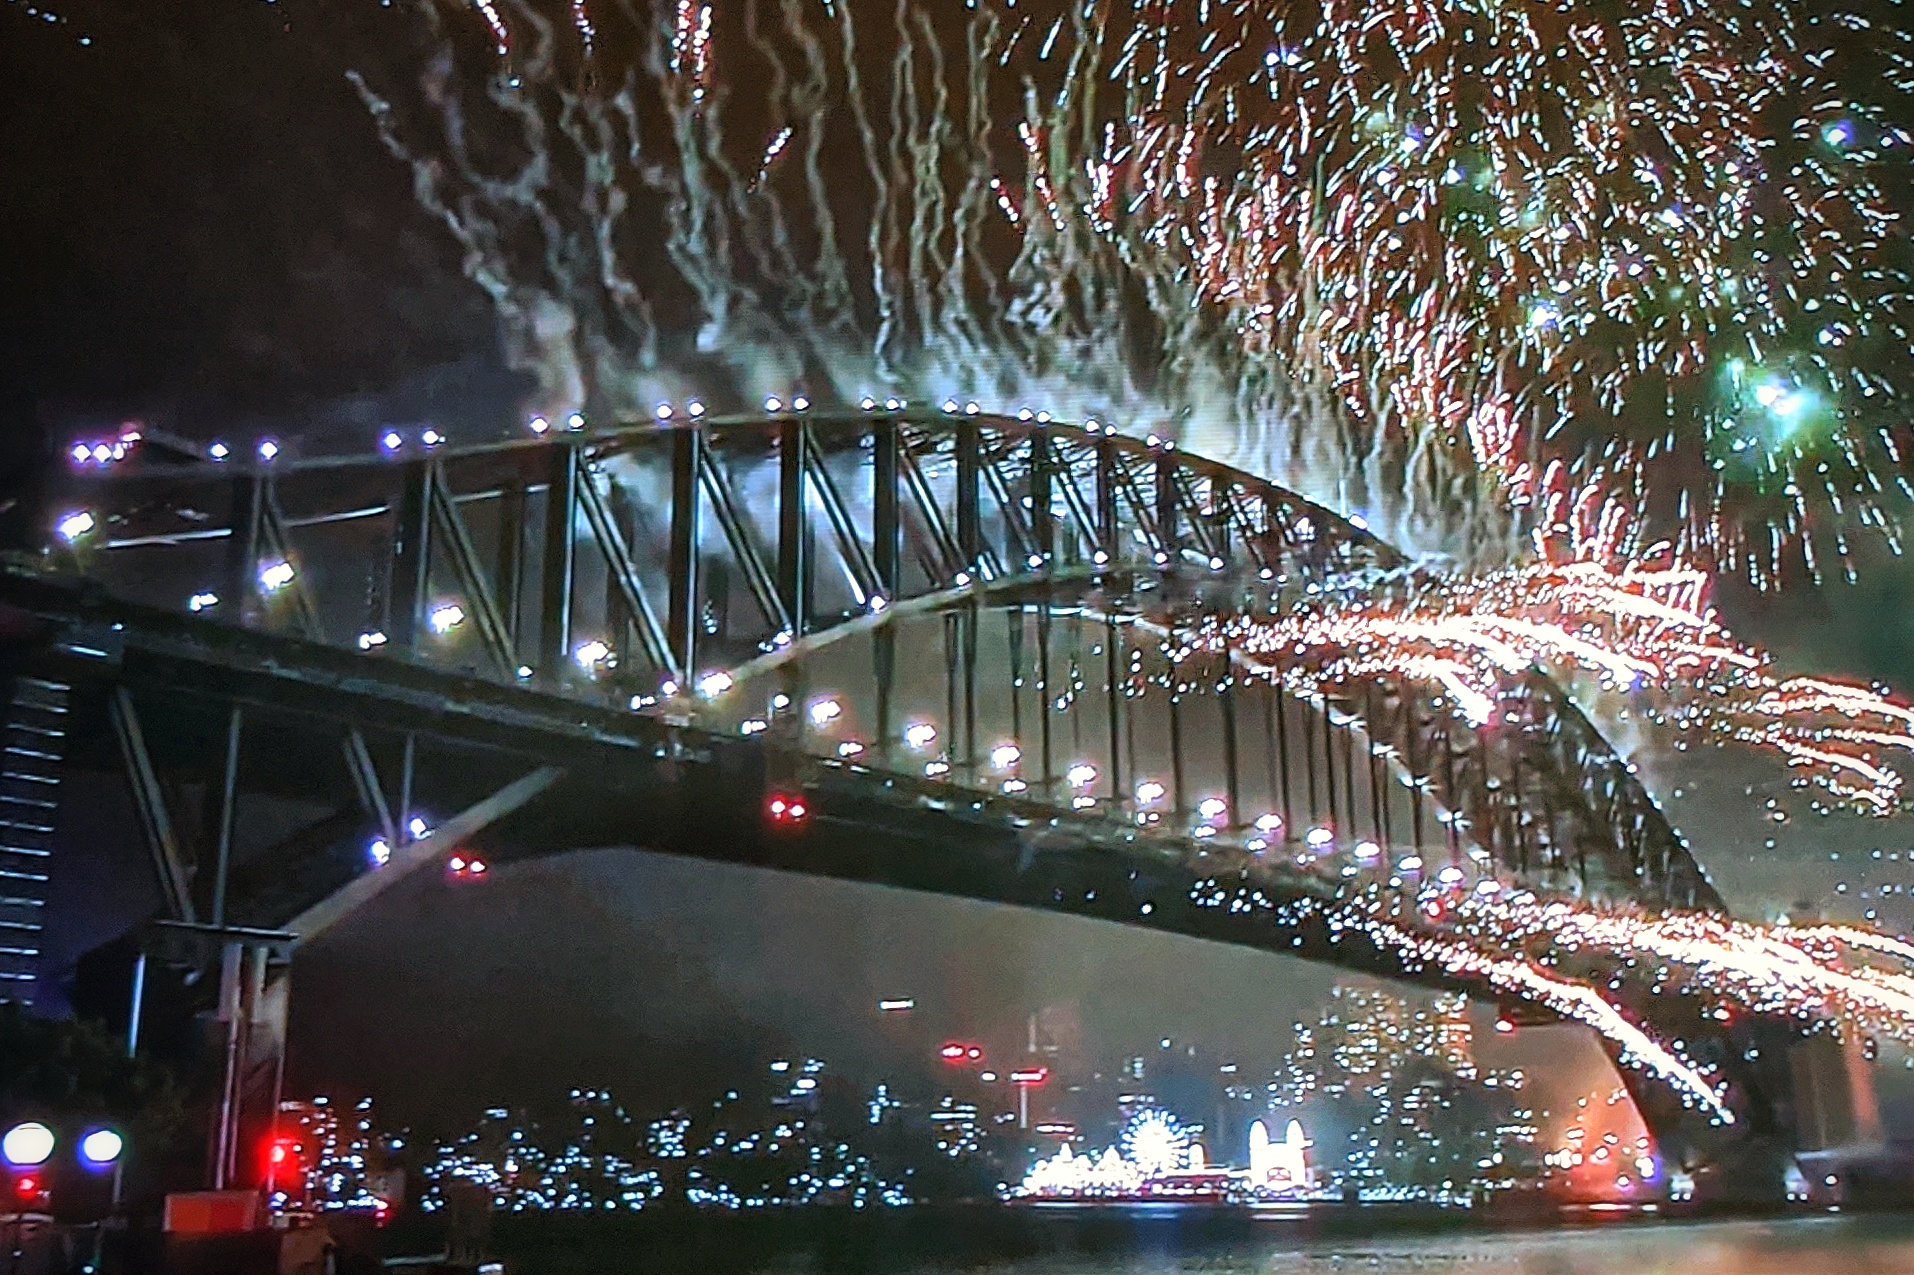 Fireworks on harbour bridge to clebrate New Year in Sydney, Australia. Hope for 2021 to be more progressive and positive